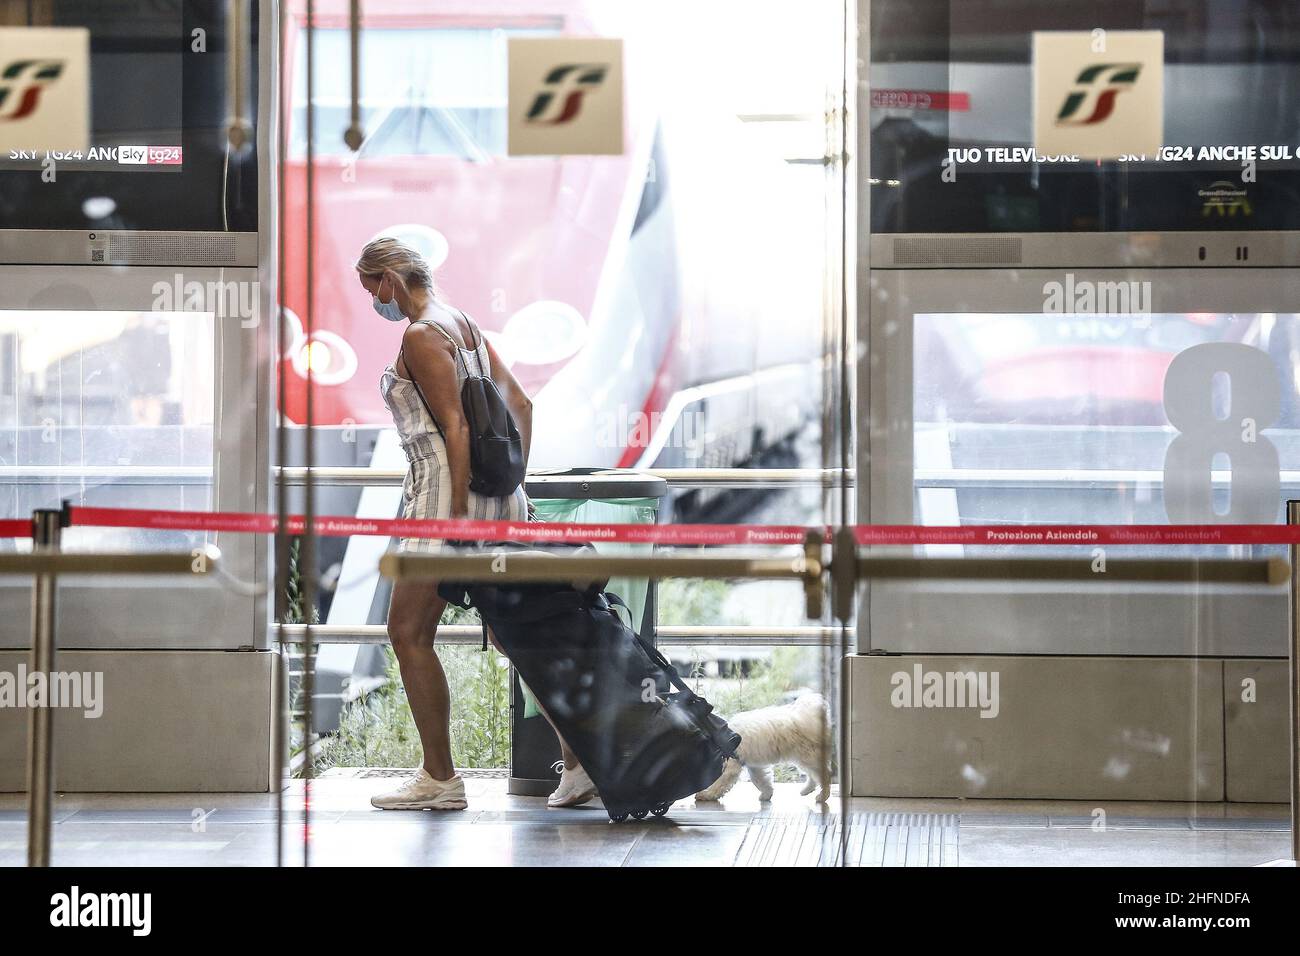 Cecilia Fabiano/LaPresse August 24 , 2020 Amatrice (Italy) News: Travelers in Termini Station In the pic : travelers with baggage Stock Photo